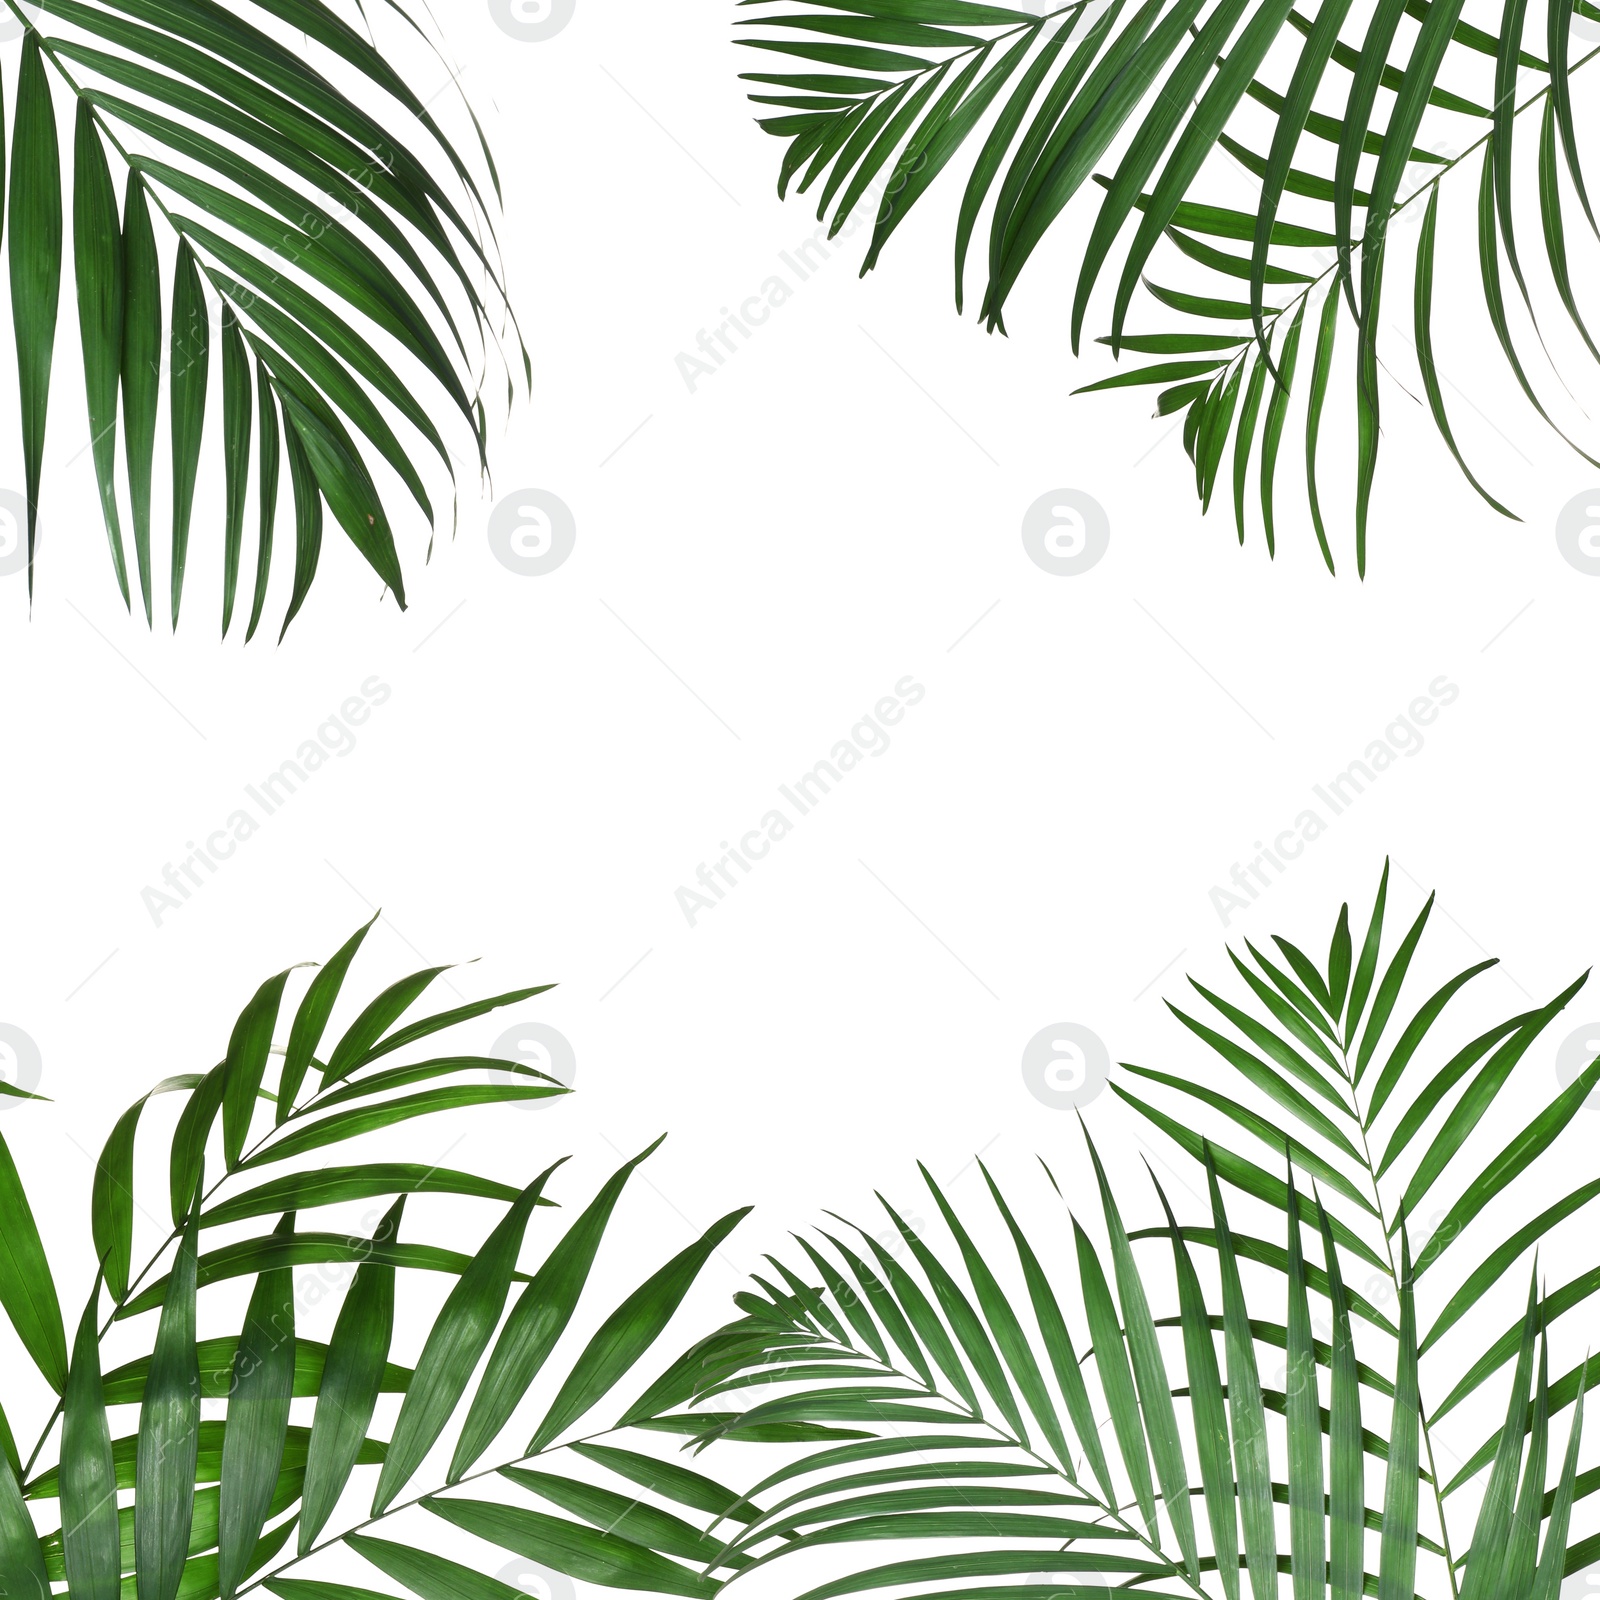 Image of Frame made of beautiful lush tropical leaves on white background. Space for text